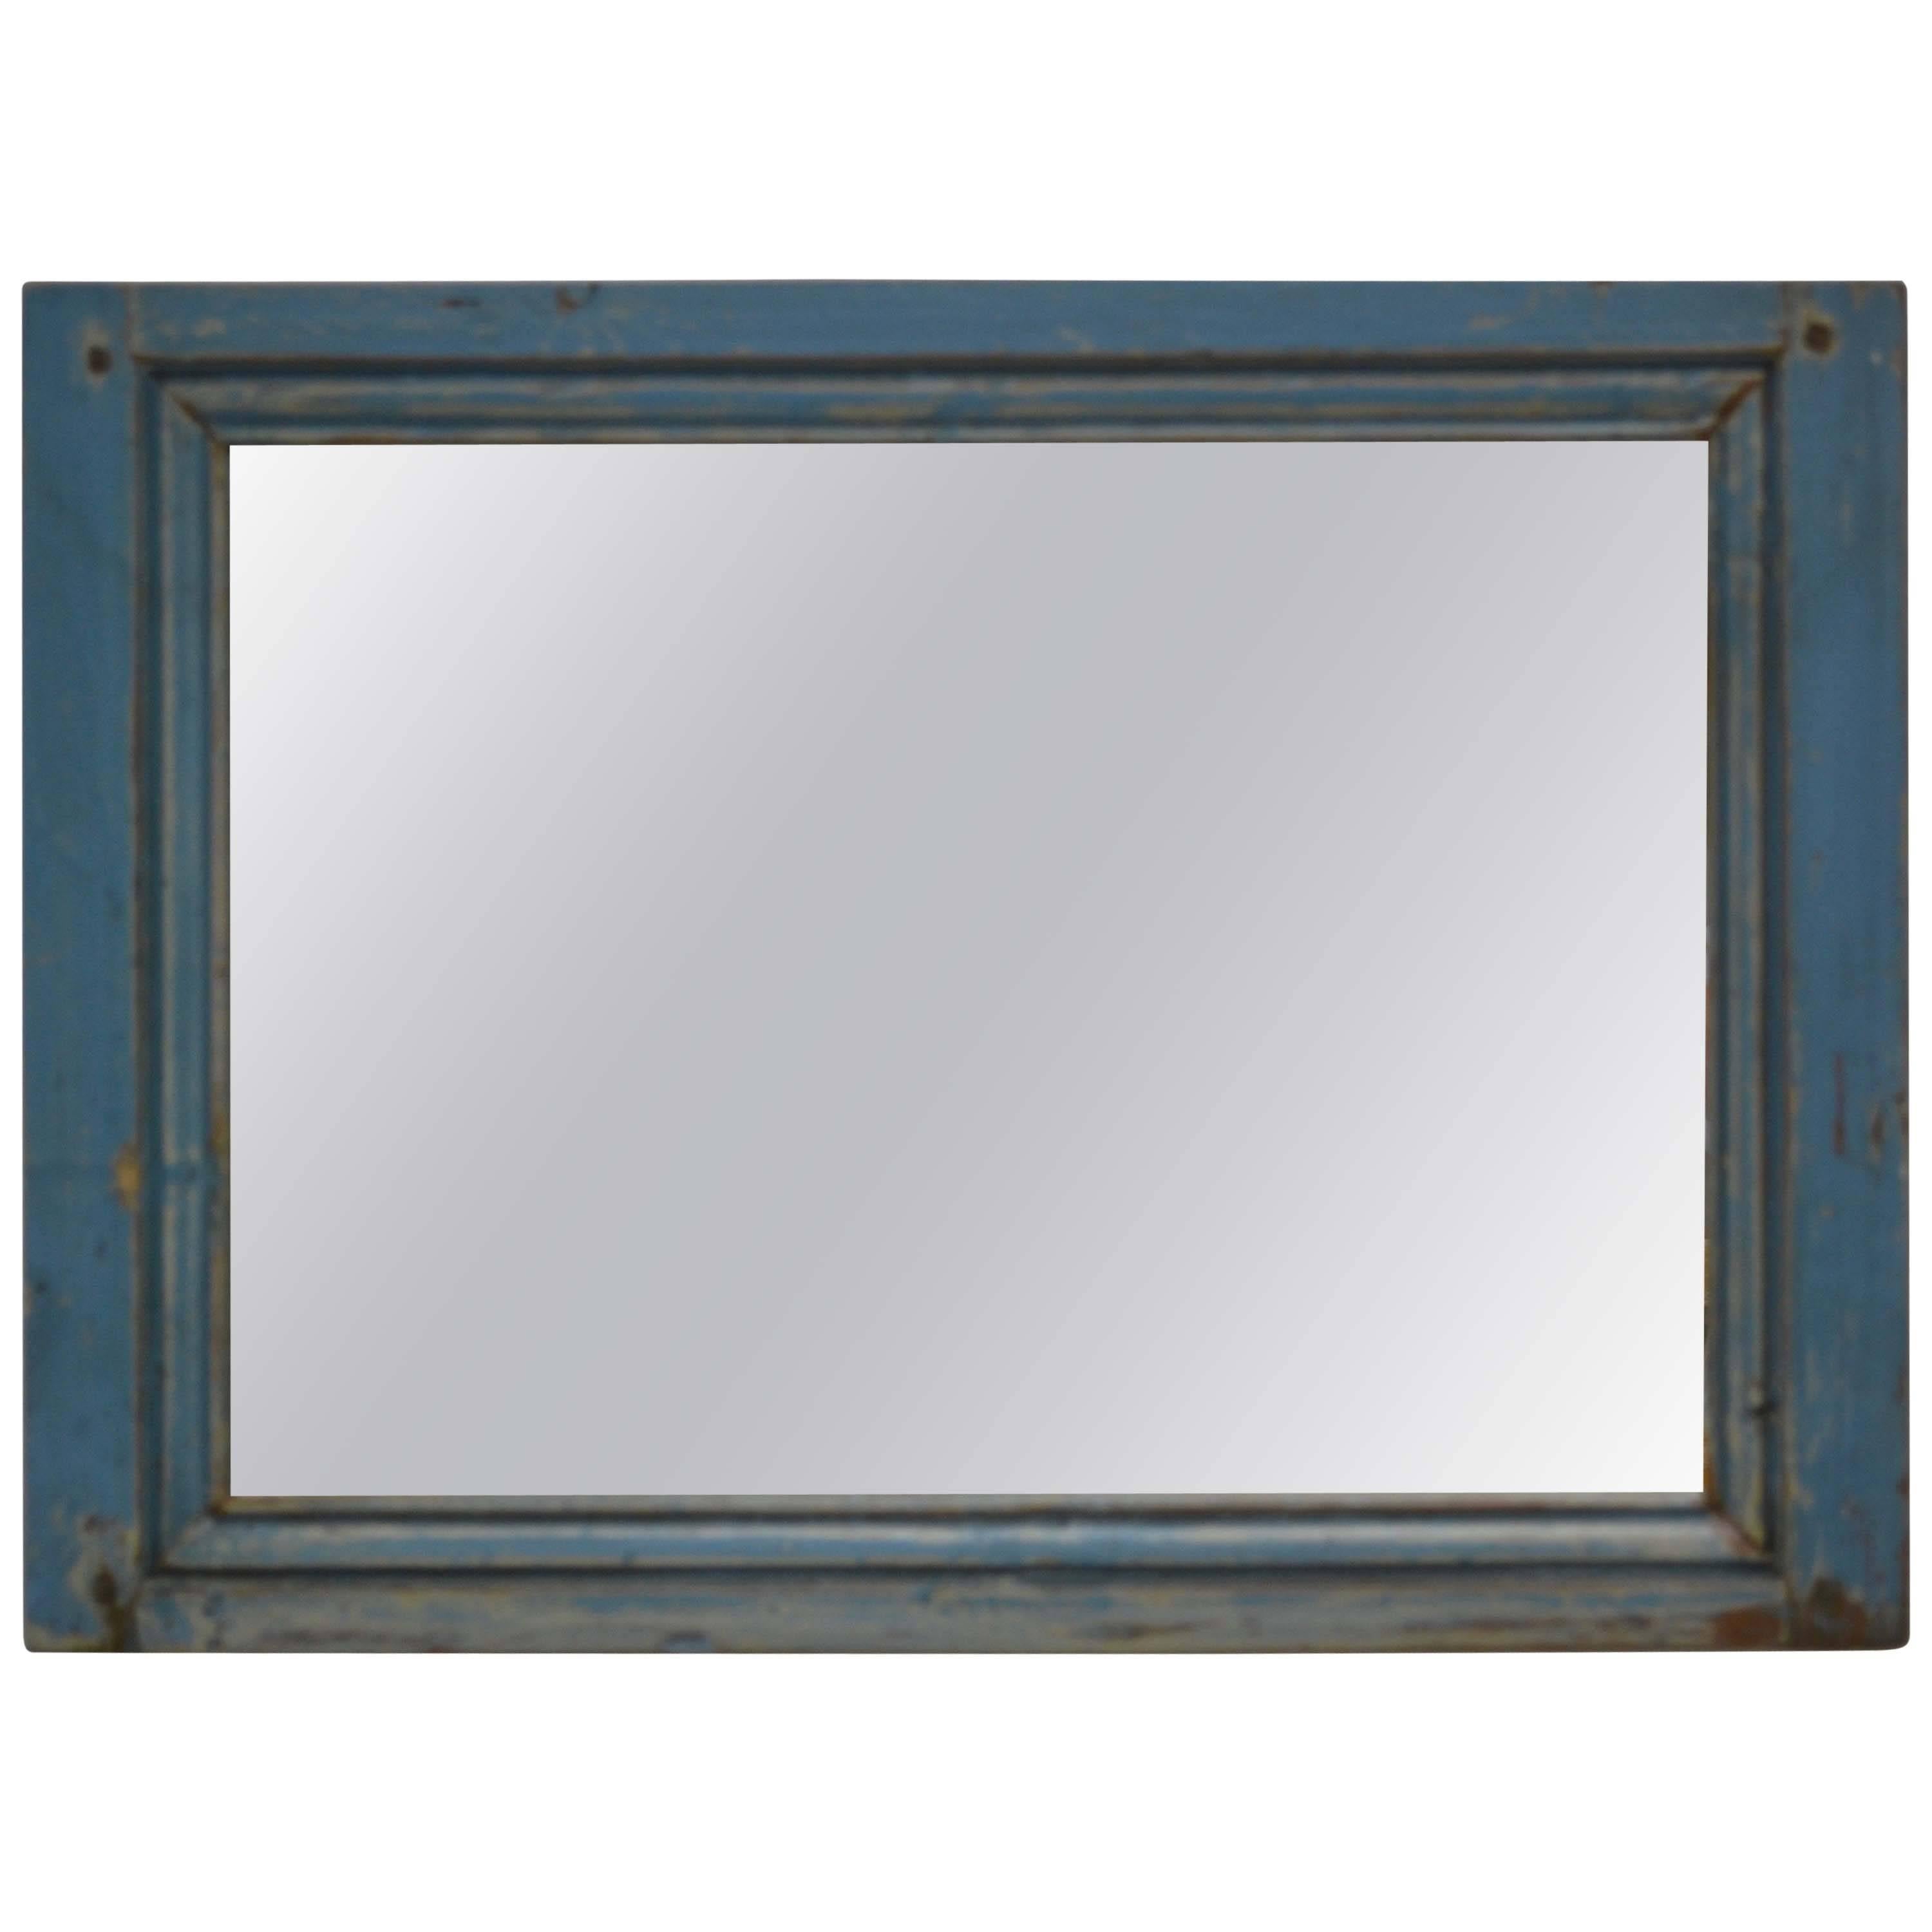 Pine Wall Mirror from Antique French Panel